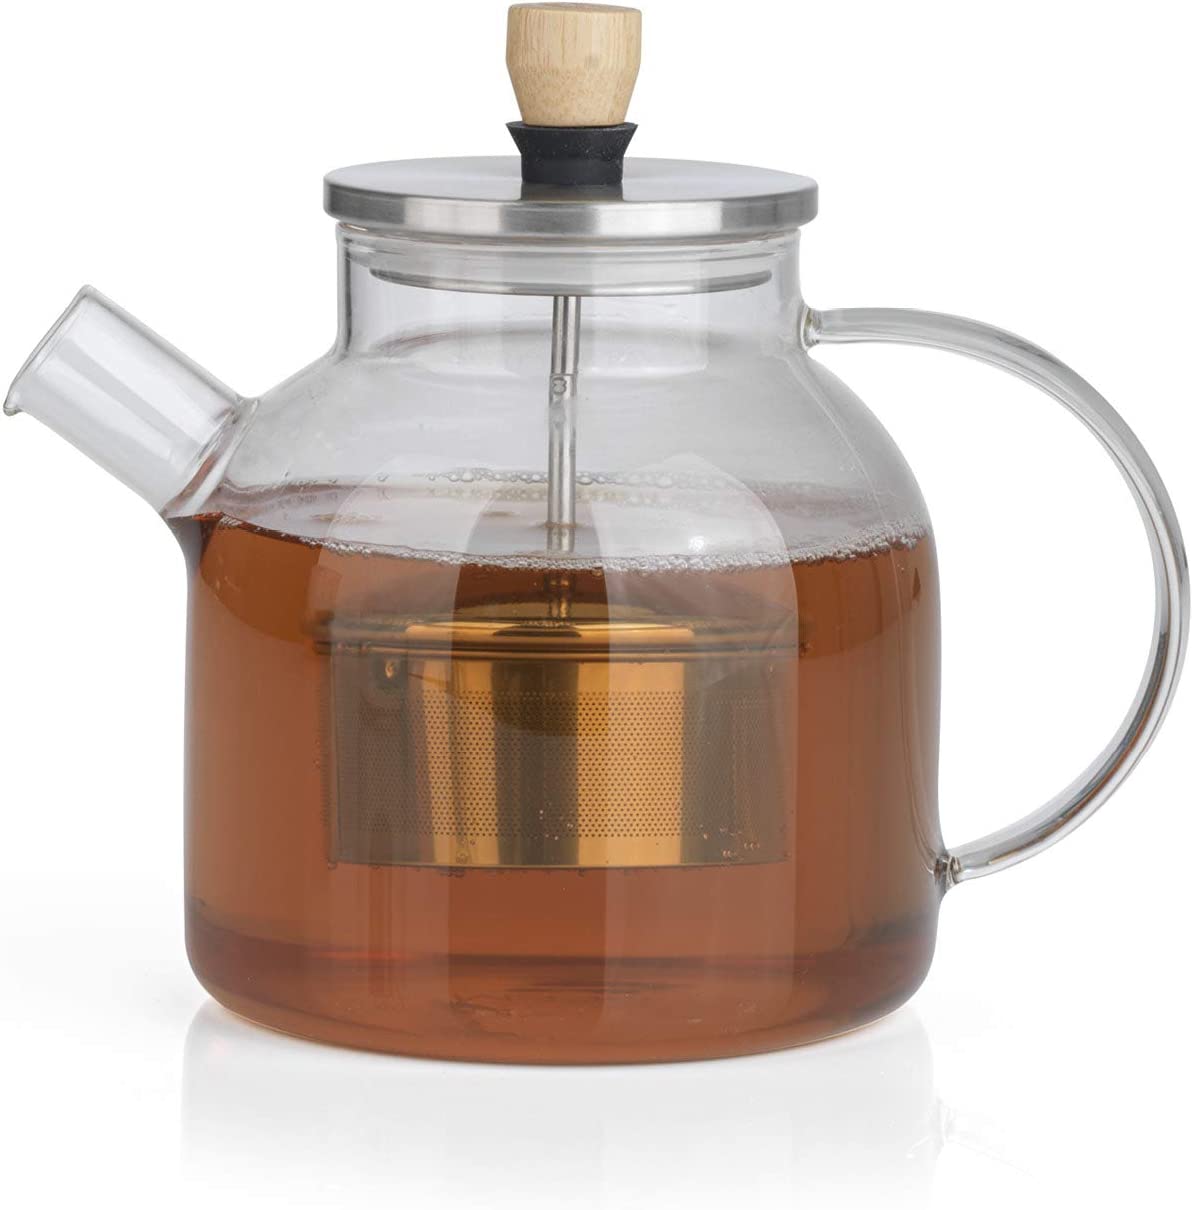 BEEM Teapot Glass Jug with Strainer Insert - 1 Litre | Teapot Glass | Strainer Stainless Steel with Lifting Function | Heat Resistant Glass | For Hot Tea or Iced Tea